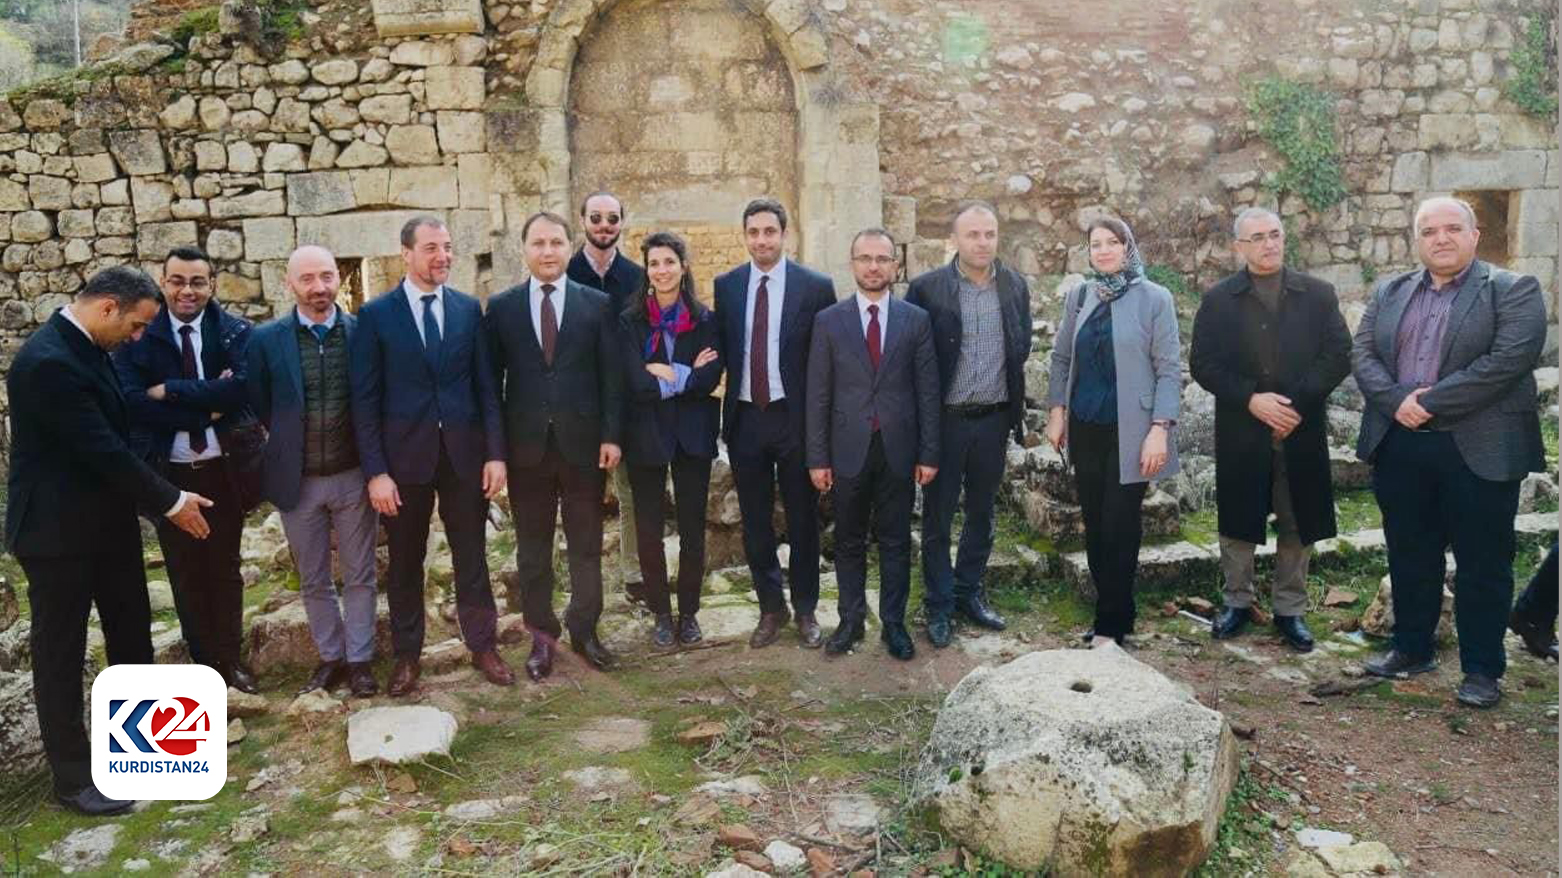 French Consulate staff and a KRG excavation team at one of  the archaeological sites in Amedi. (Photo: Kurdistan 24)